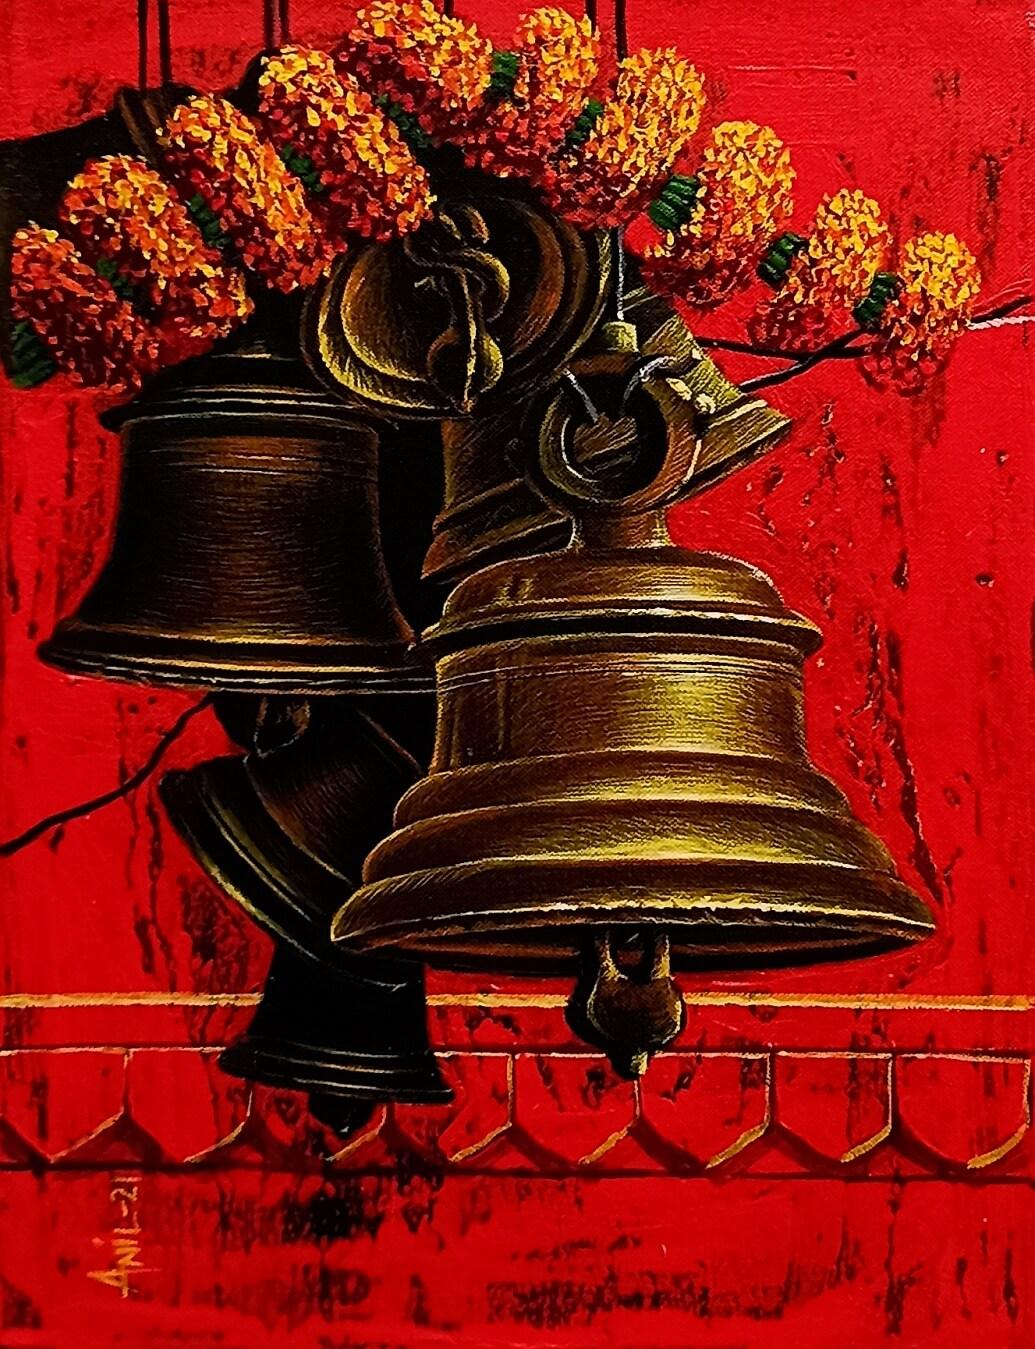 Anil Kumar Yadav Interior Painting - Bells, Acrylic on Canvas, Red, Orange Colors Contemporary Artist "In Stock"